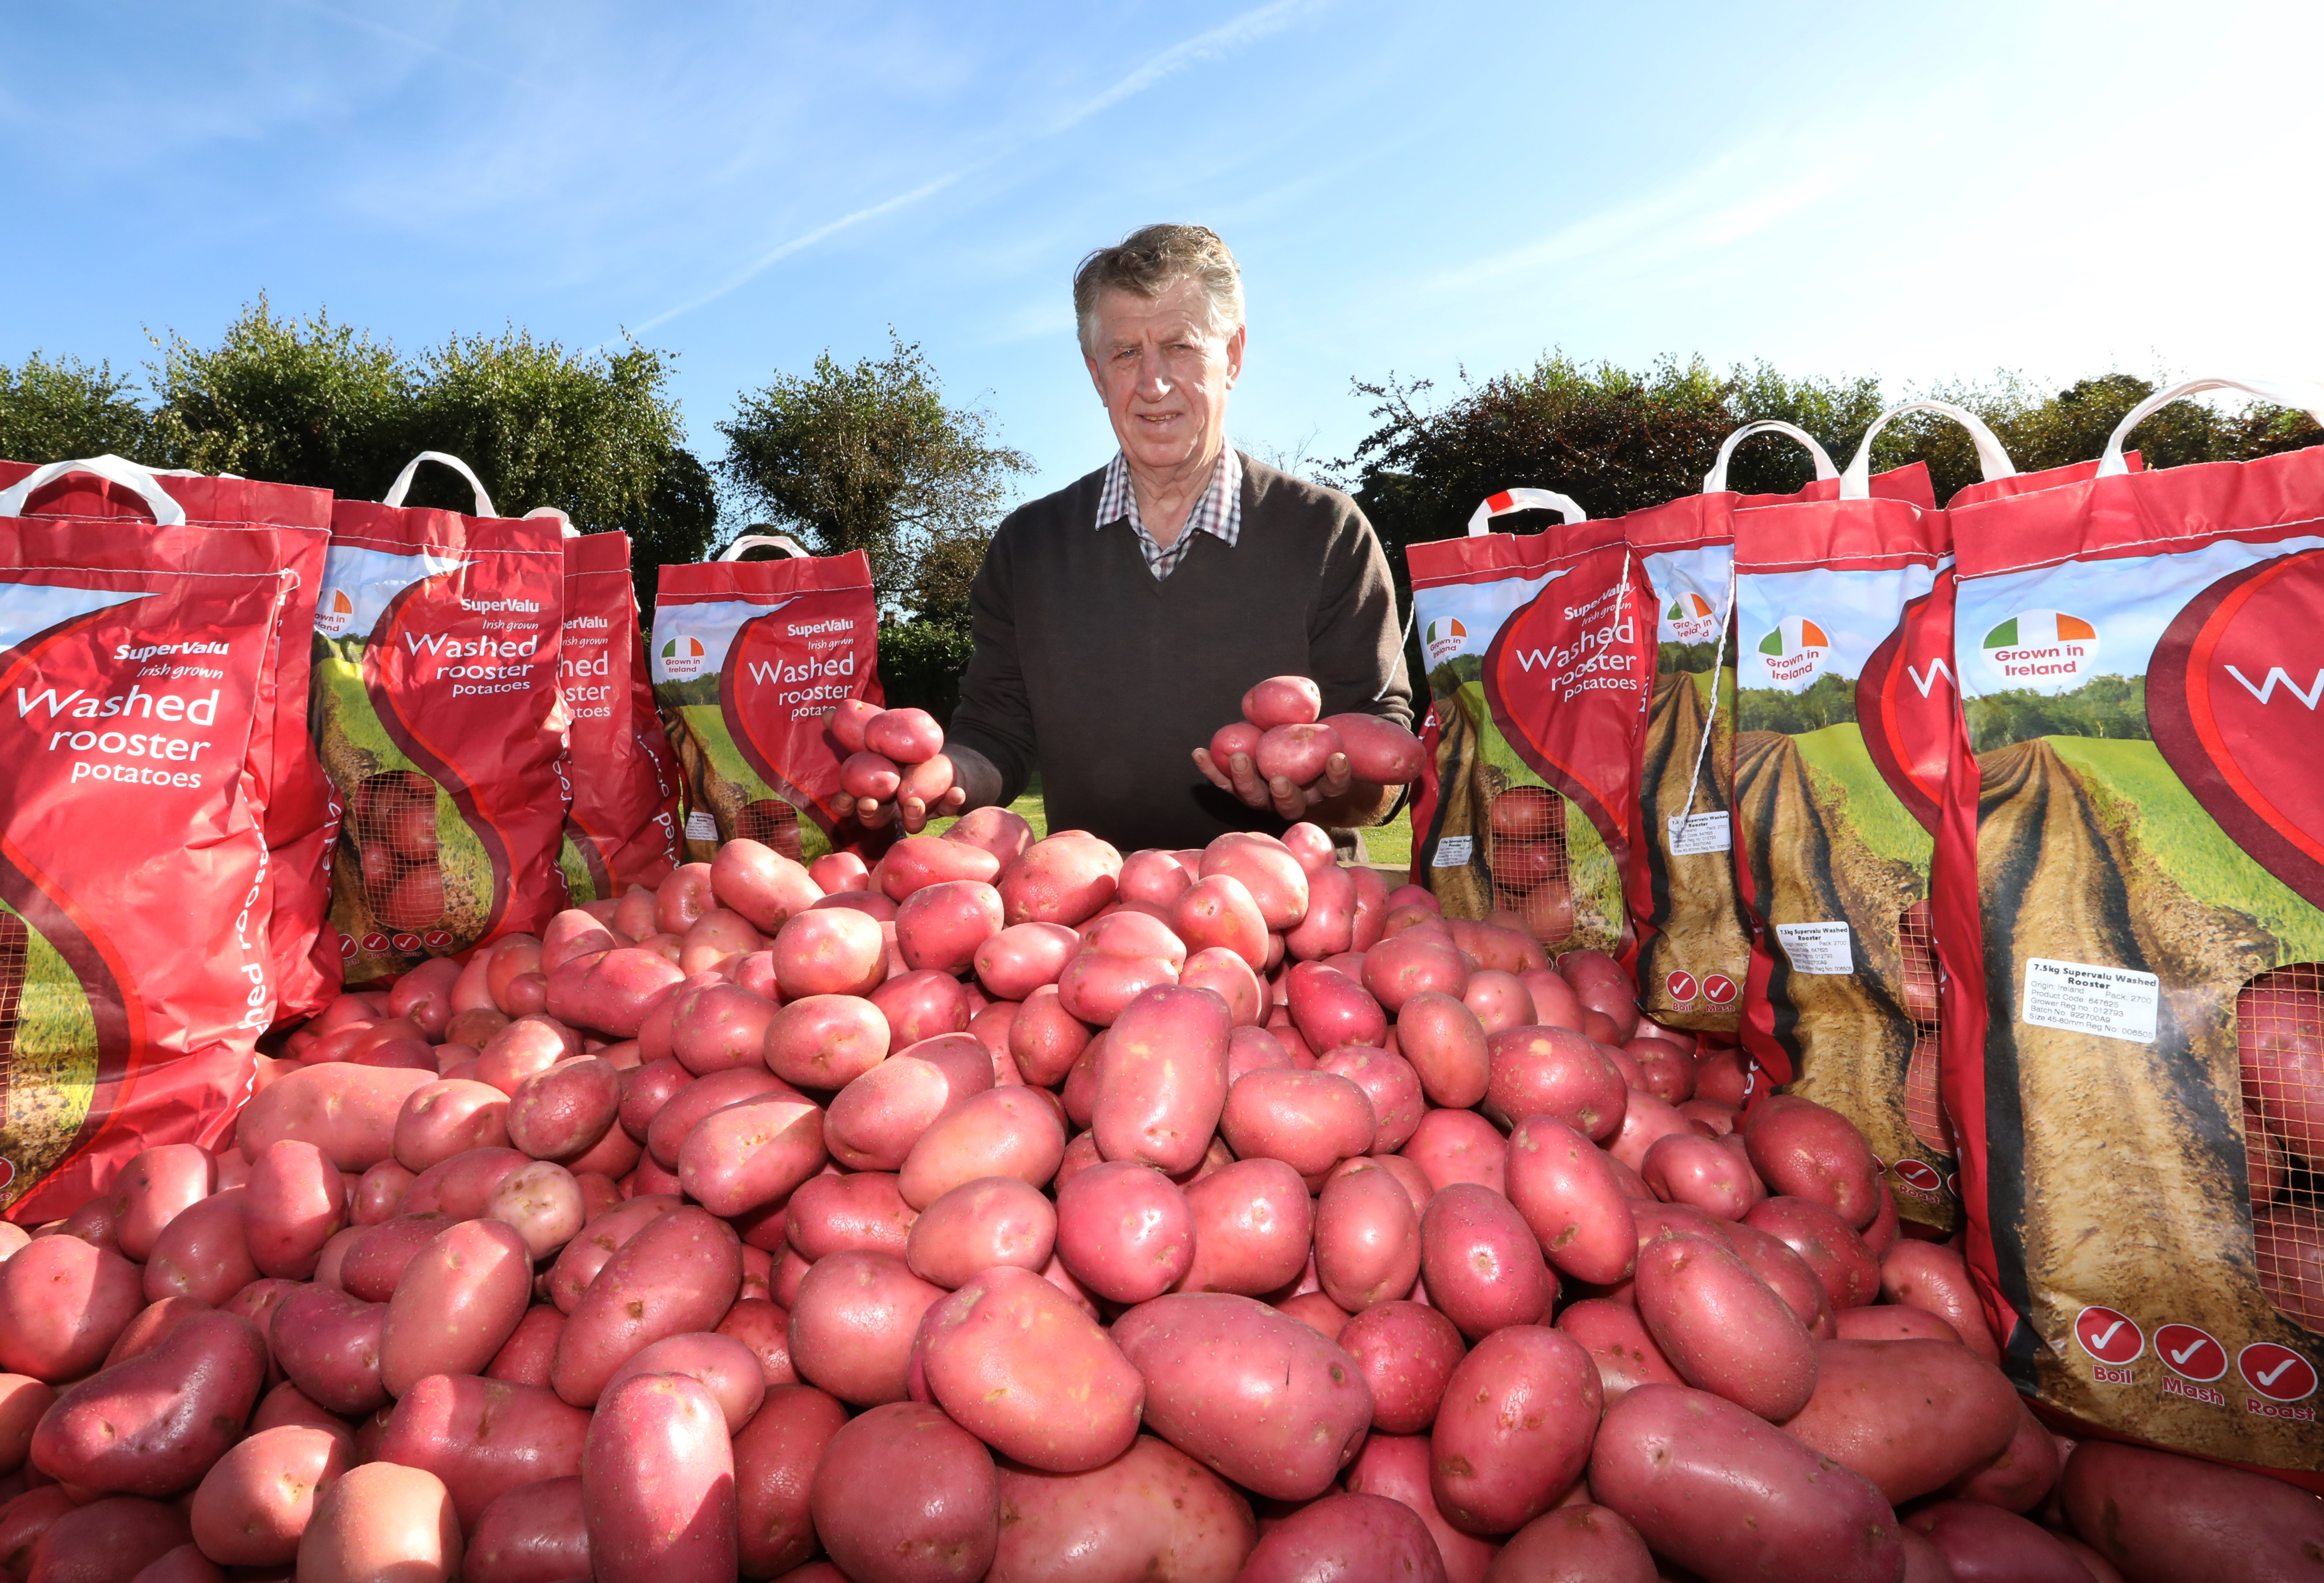 SuperValu launches new 100% Recyclable & Compostable Packaging on New Season Potatoes